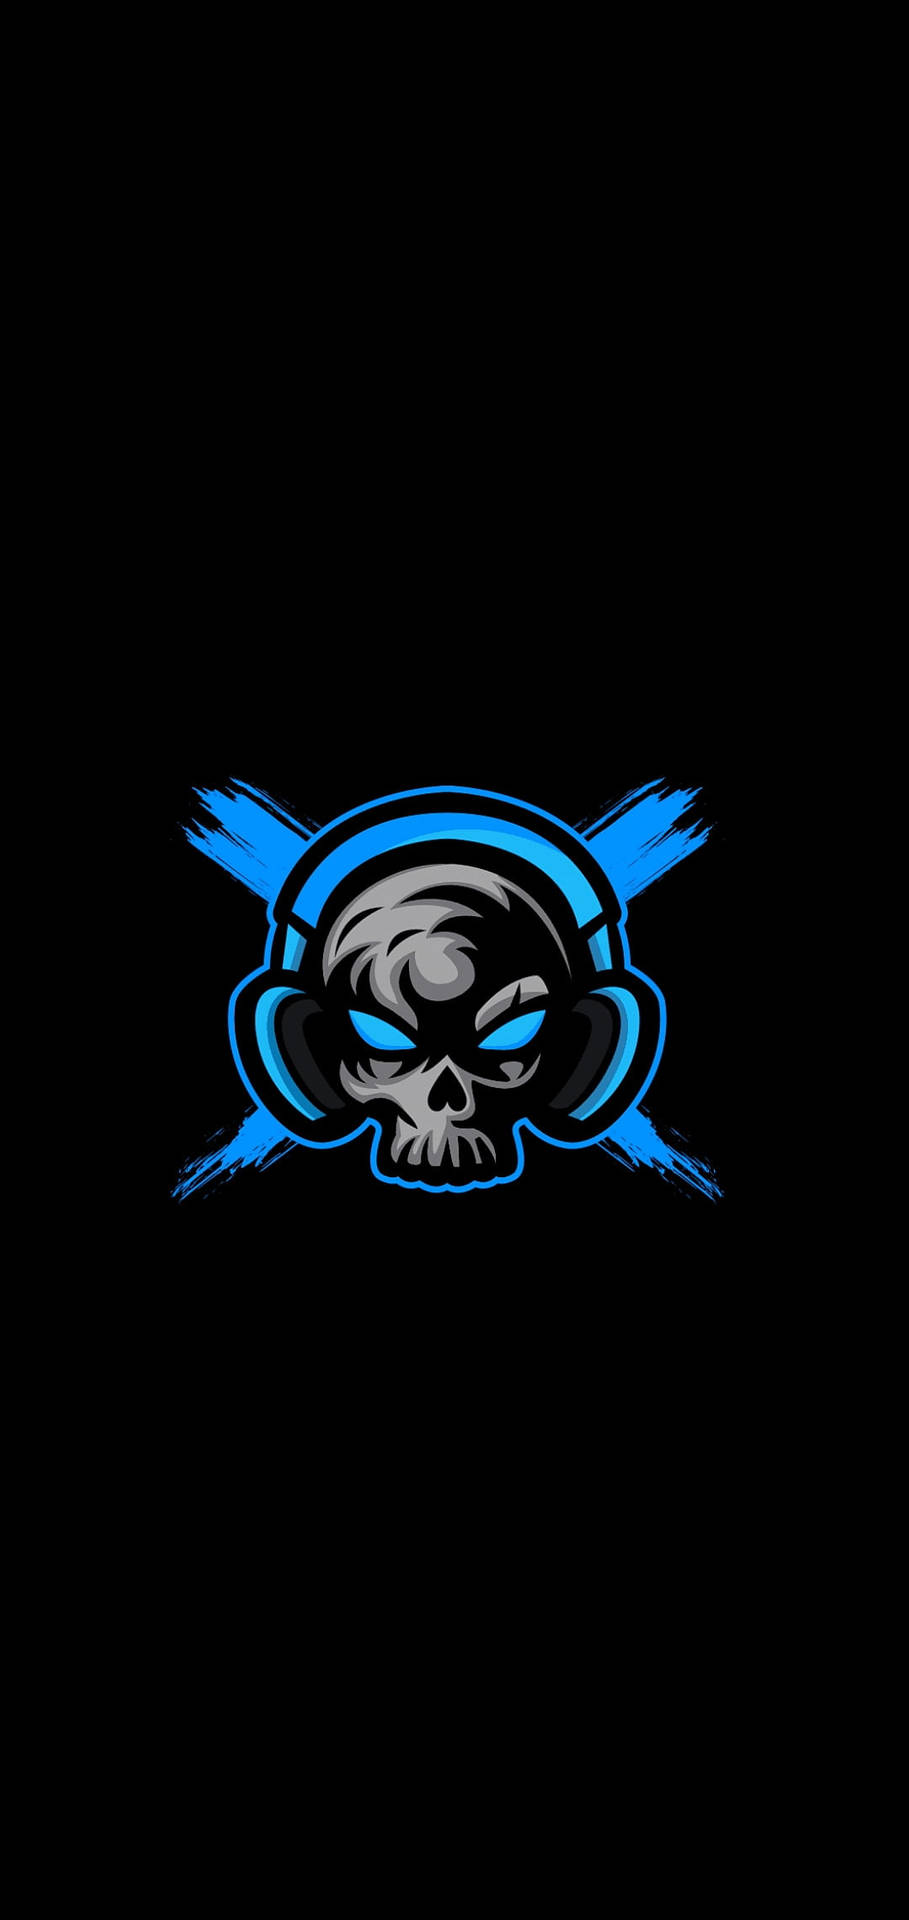 Enthralling Skull With Headphones Gaming Logo Hd Background